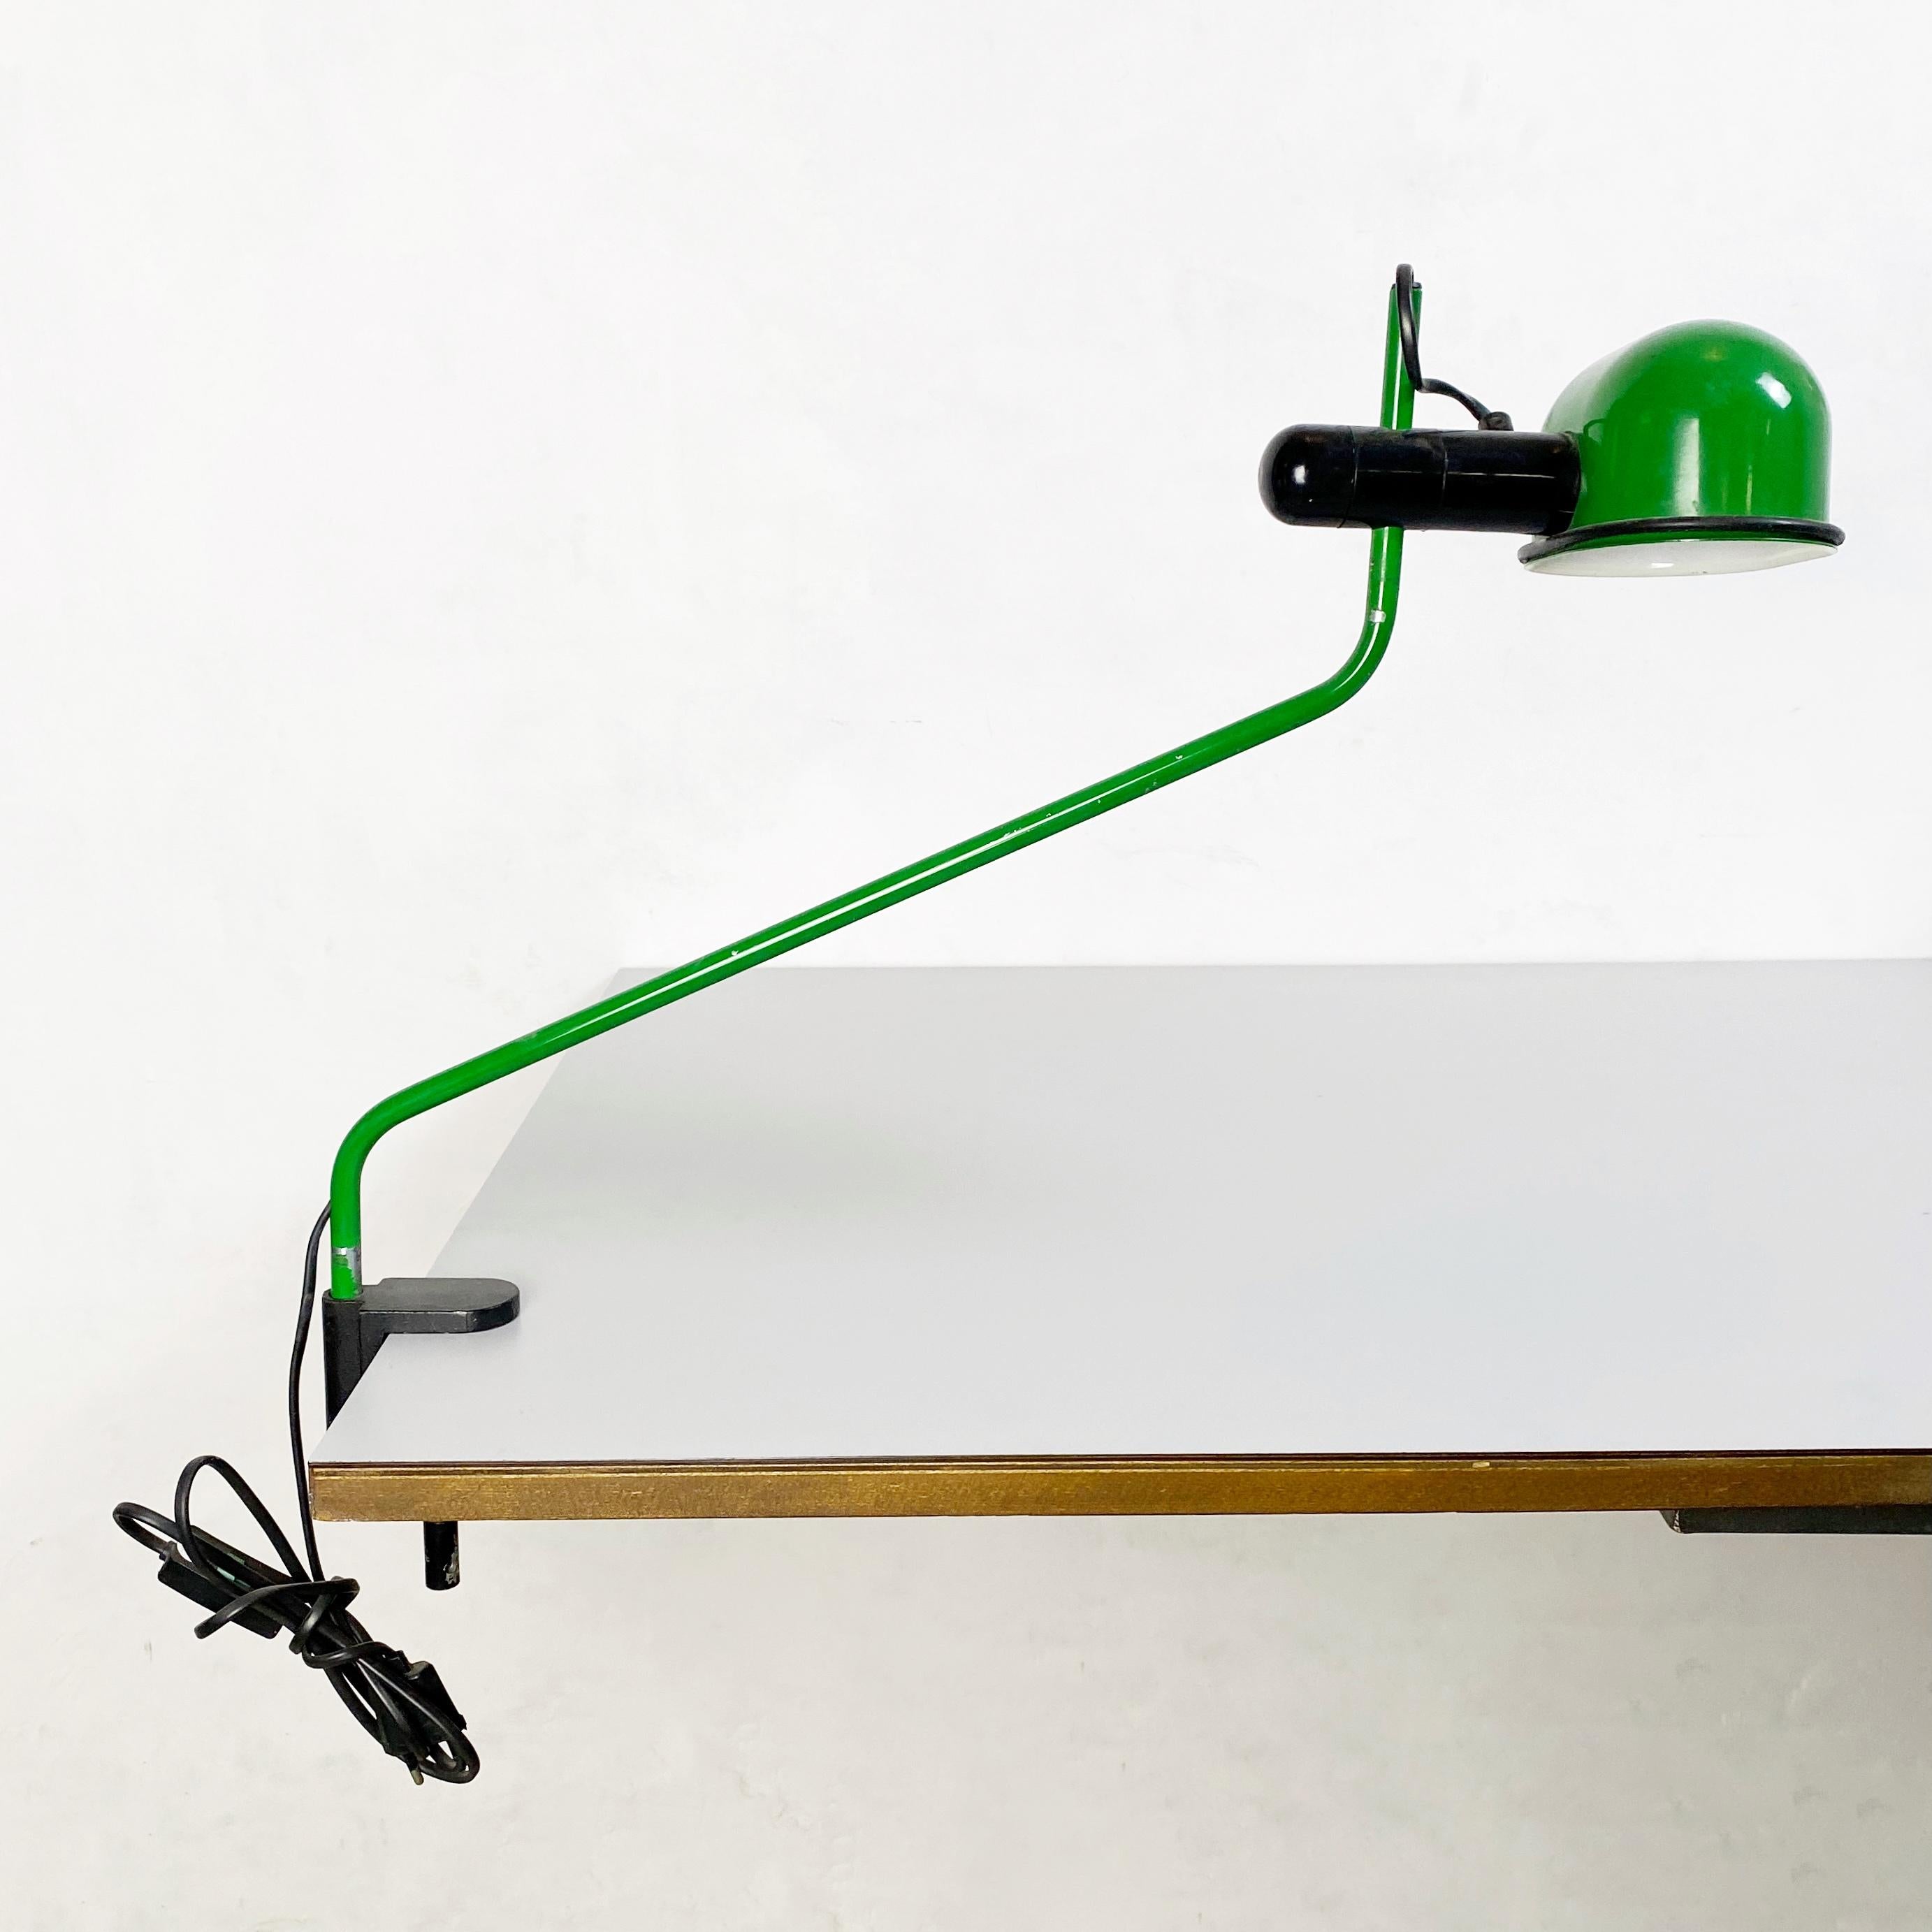 Italian Mid-Century Modern green metal clamp-on table lamp, 1980s
Green metal clamp-on table lamp painted in green and white with black plastic details. Adjustable structure.
Perfect for work and run with bulb 220v and 120v
This is a very pop and